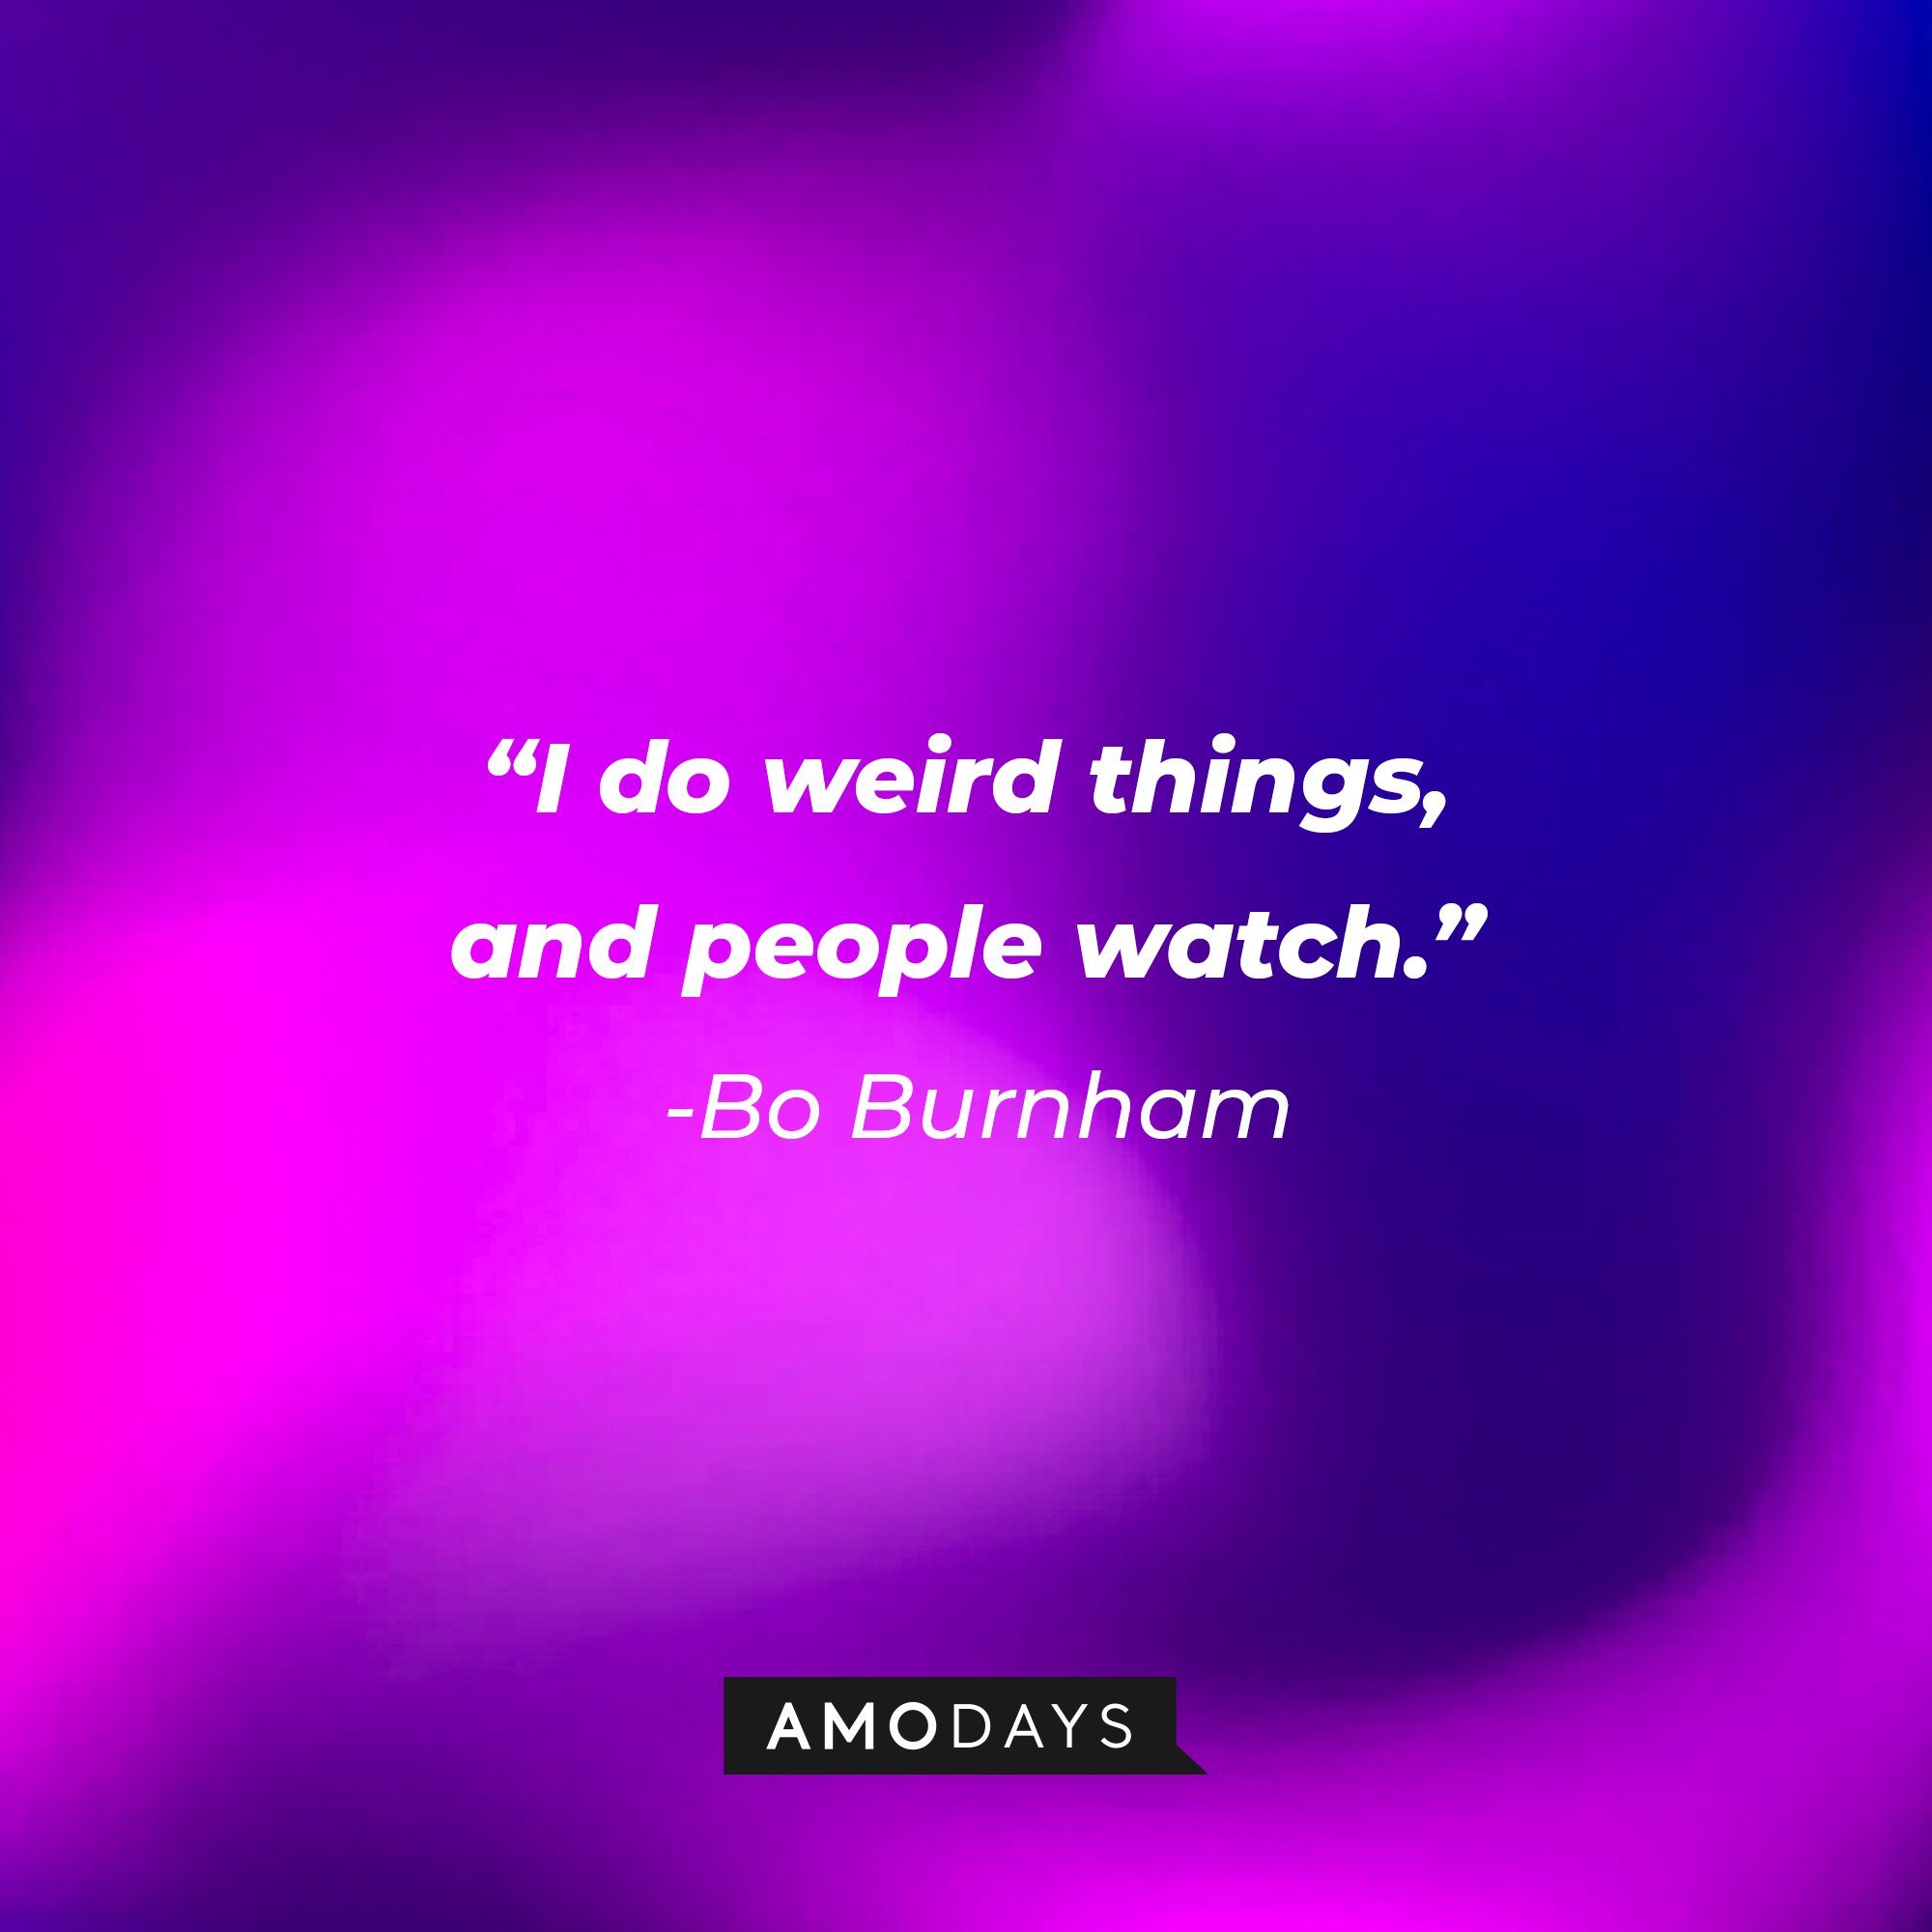 Bo Burnham’s quote: "I do weird things, and people watch." | Image: AmoDays